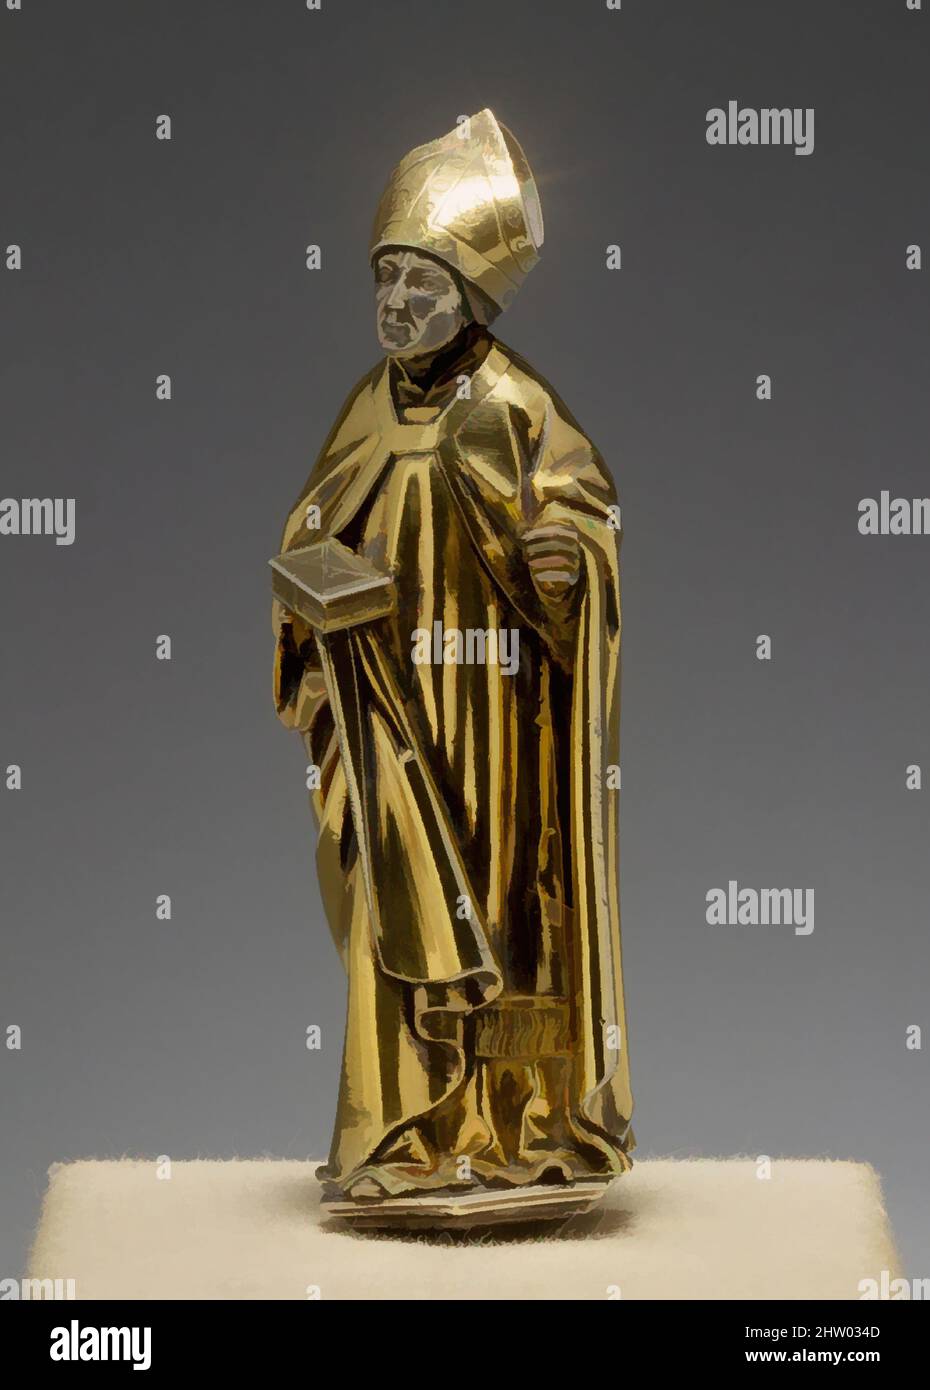 Art inspired by Standing Bishop, ca. 1510, Made in Aachen, Germany, German, Silver and silver gilt, Overall (without pin): 4 1/16 x 1 7/16 x 1 3/16 in. (10.3 x 3.6 x 3 cm), Metalwork-Silver, Hans von Reutlingen (German, Aachen, 1465–1547) or Workshop, This finely worked figure appears, Classic works modernized by Artotop with a splash of modernity. Shapes, color and value, eye-catching visual impact on art. Emotions through freedom of artworks in a contemporary way. A timeless message pursuing a wildly creative new direction. Artists turning to the digital medium and creating the Artotop NFT Stock Photo